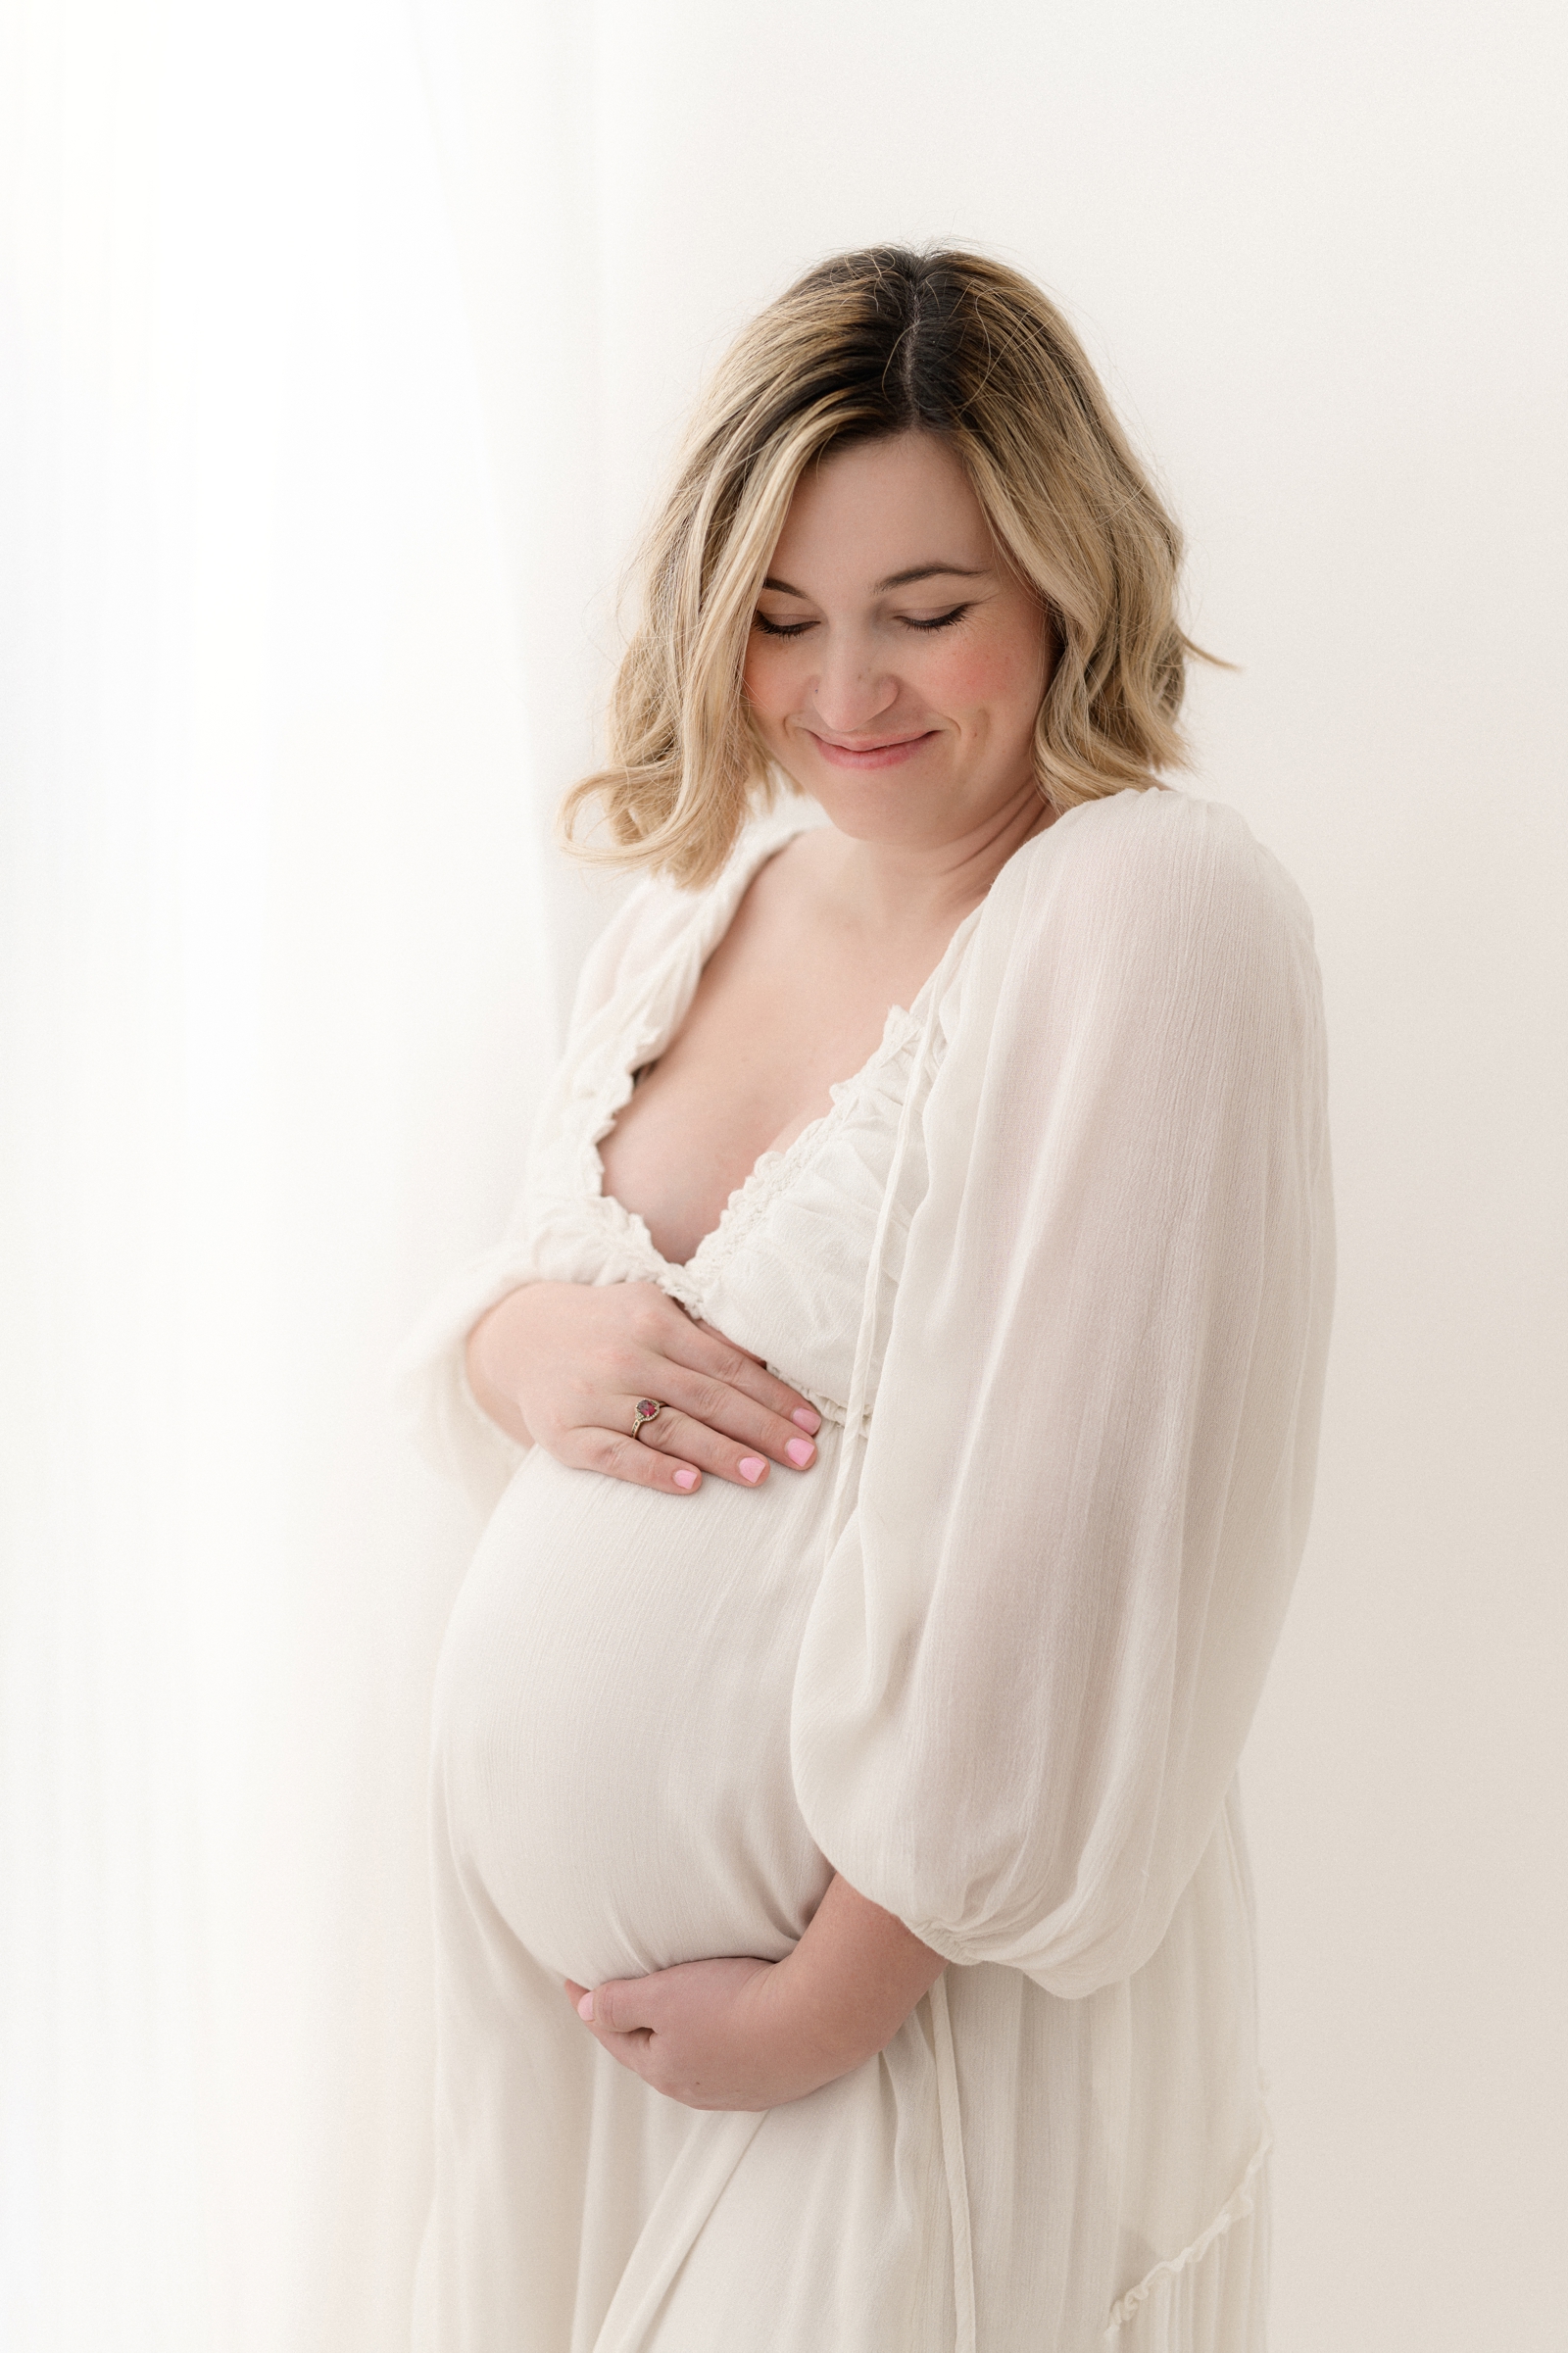 when to take maternity photos of a pregnant mom